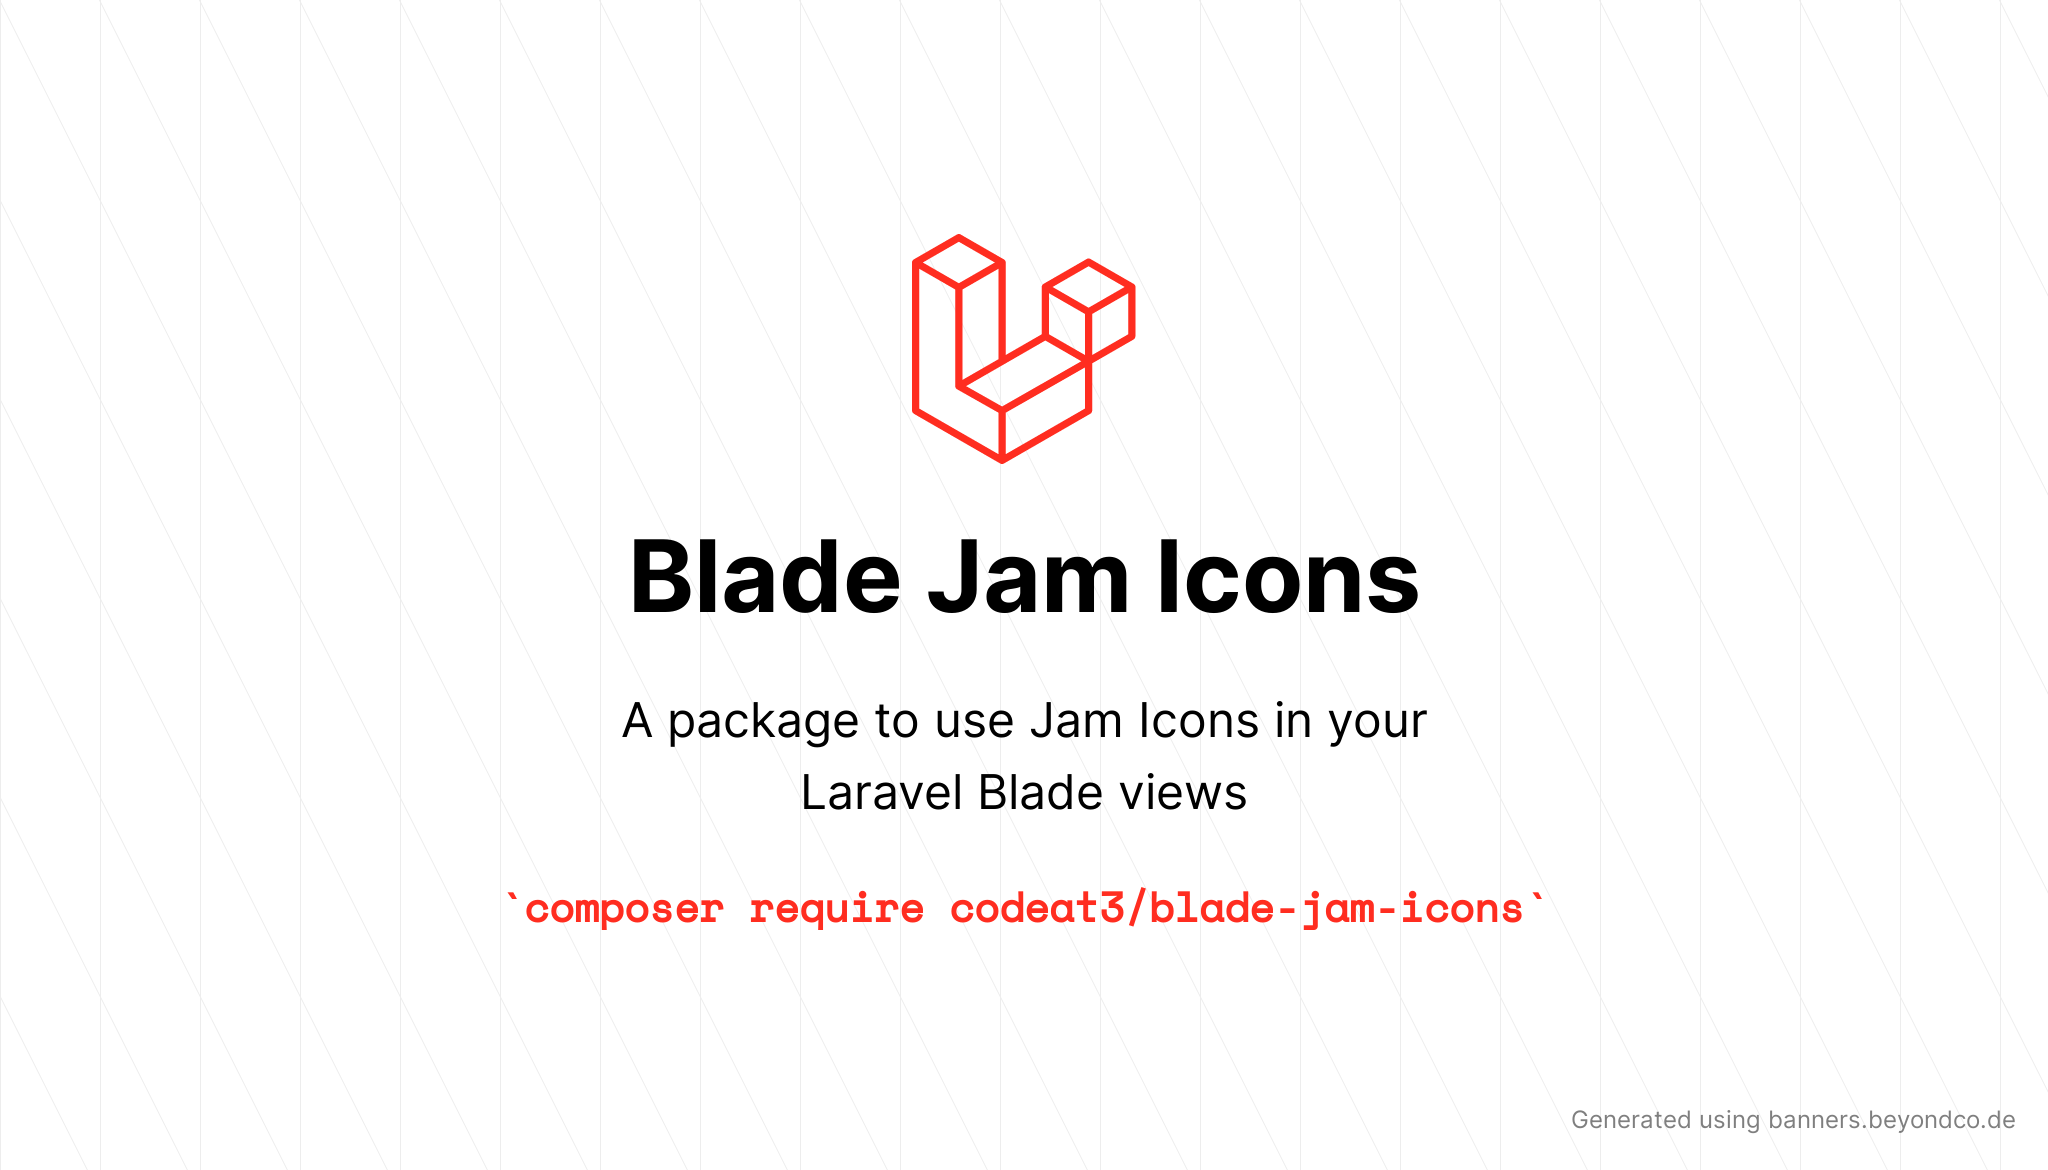 socialcard-blade-jam-icons.png